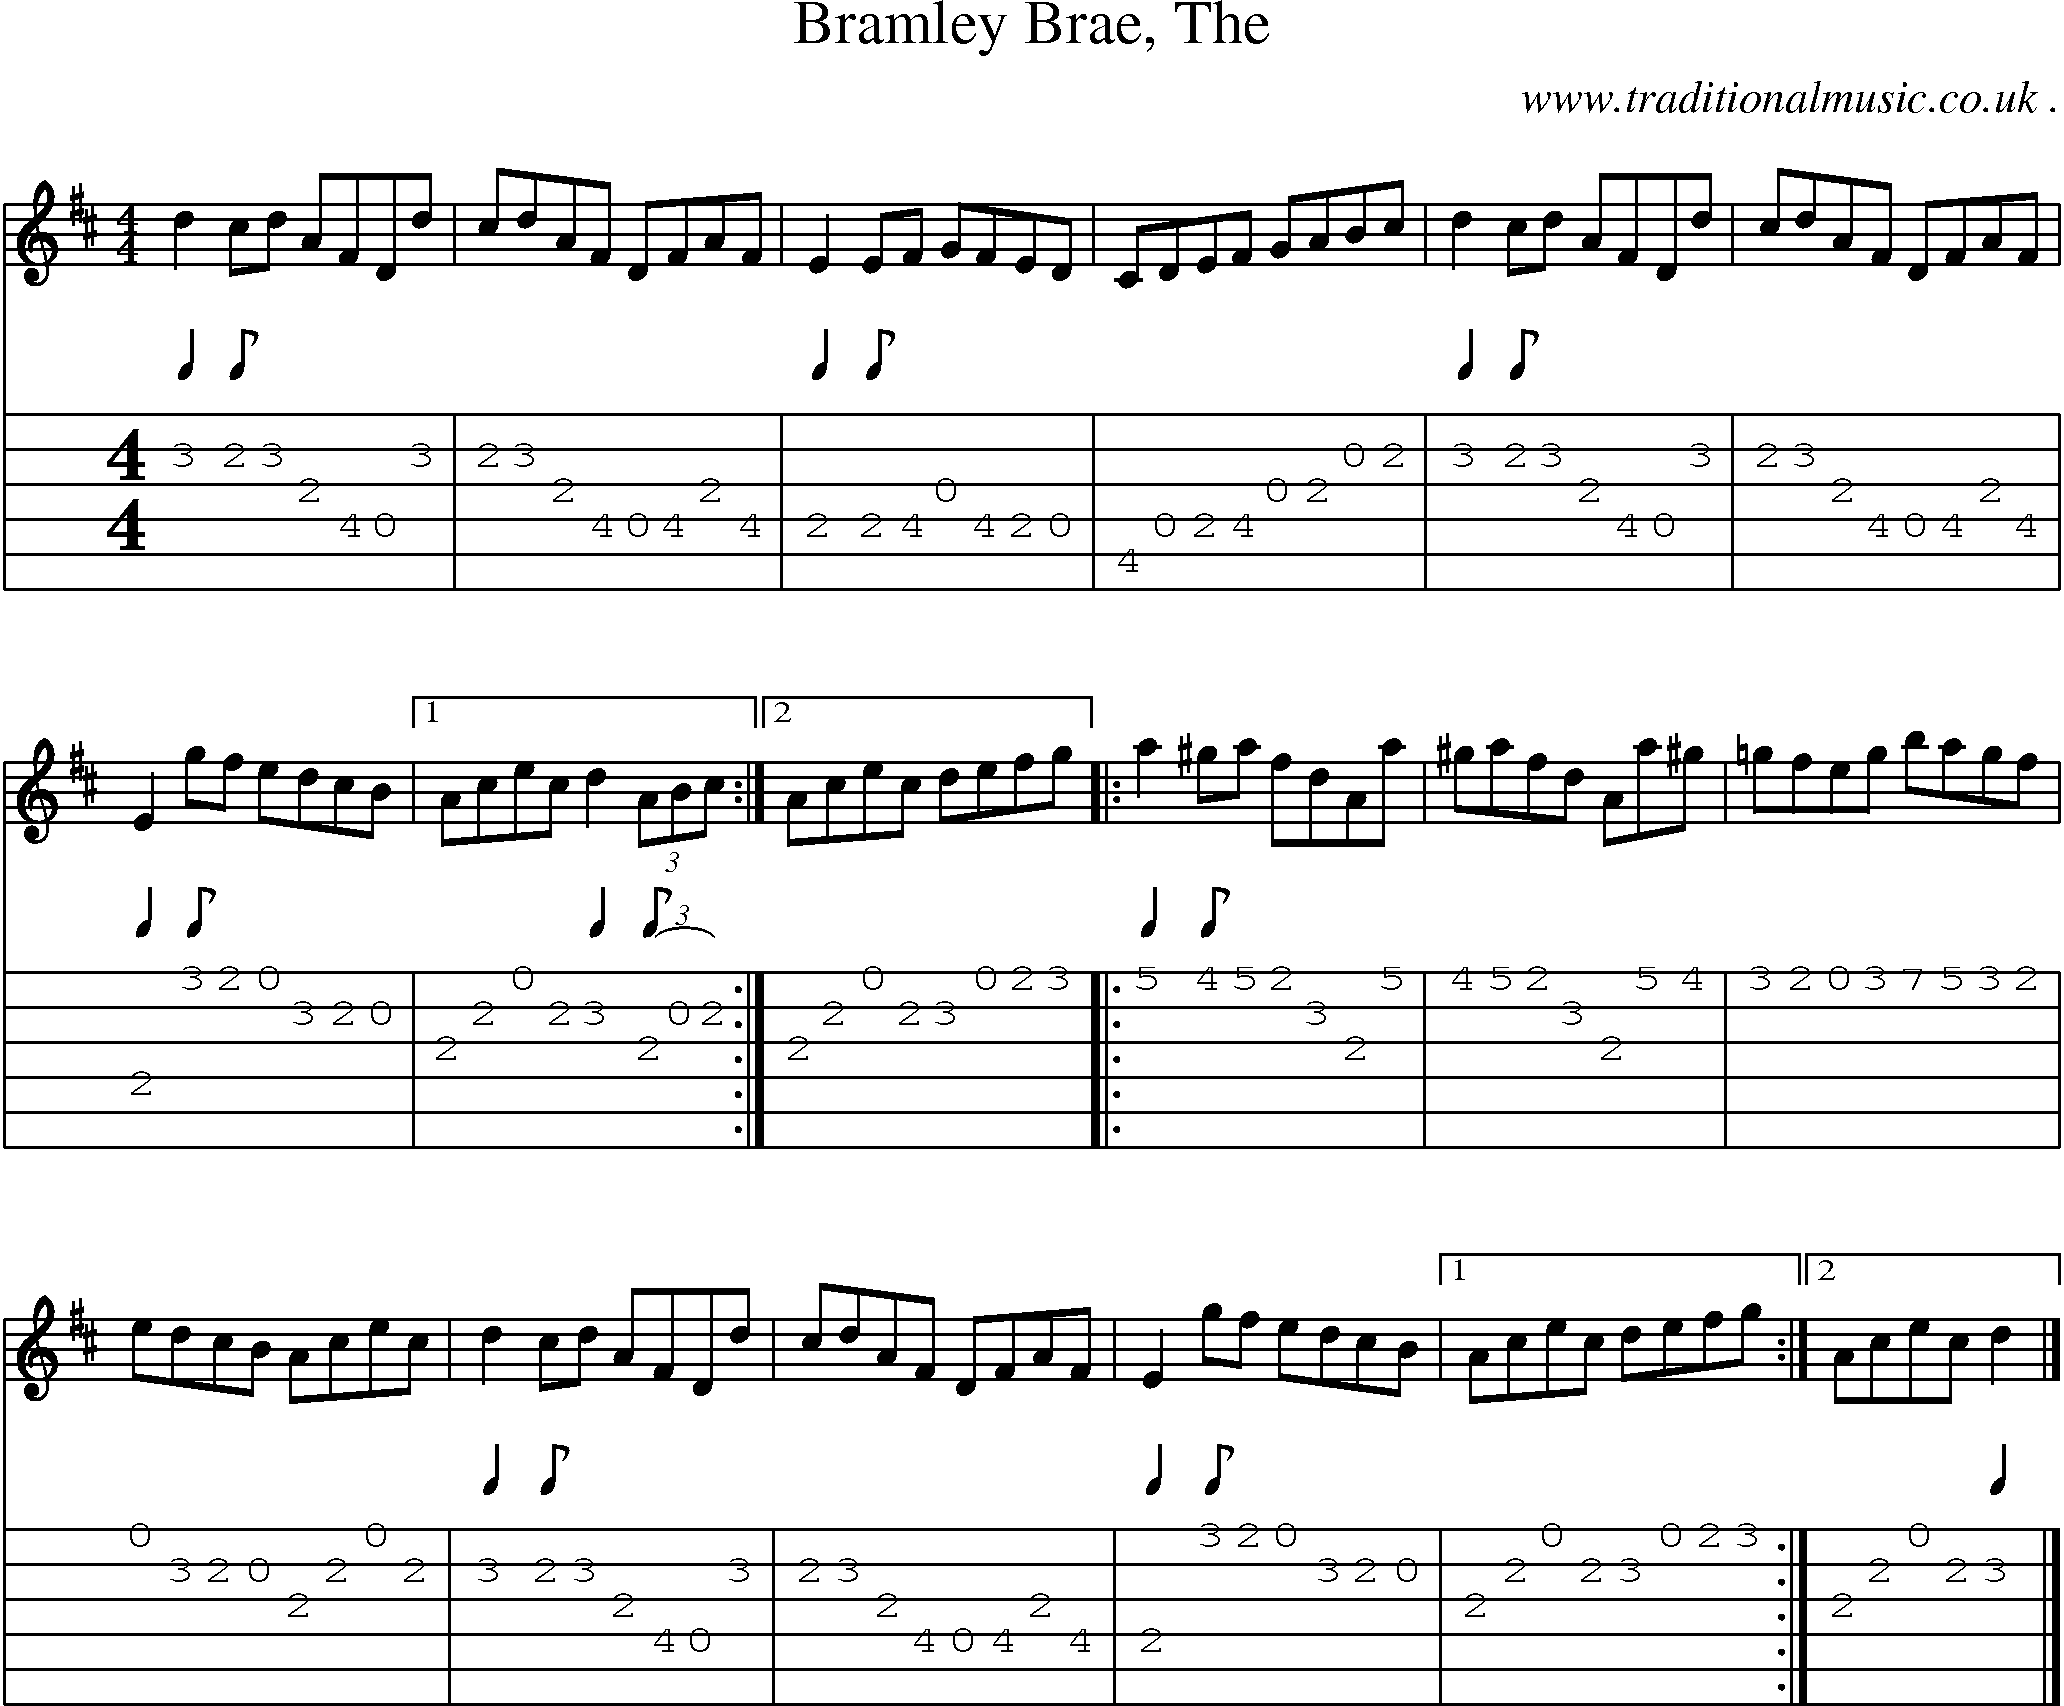 Sheet-music  score, Chords and Guitar Tabs for Bramley Brae The